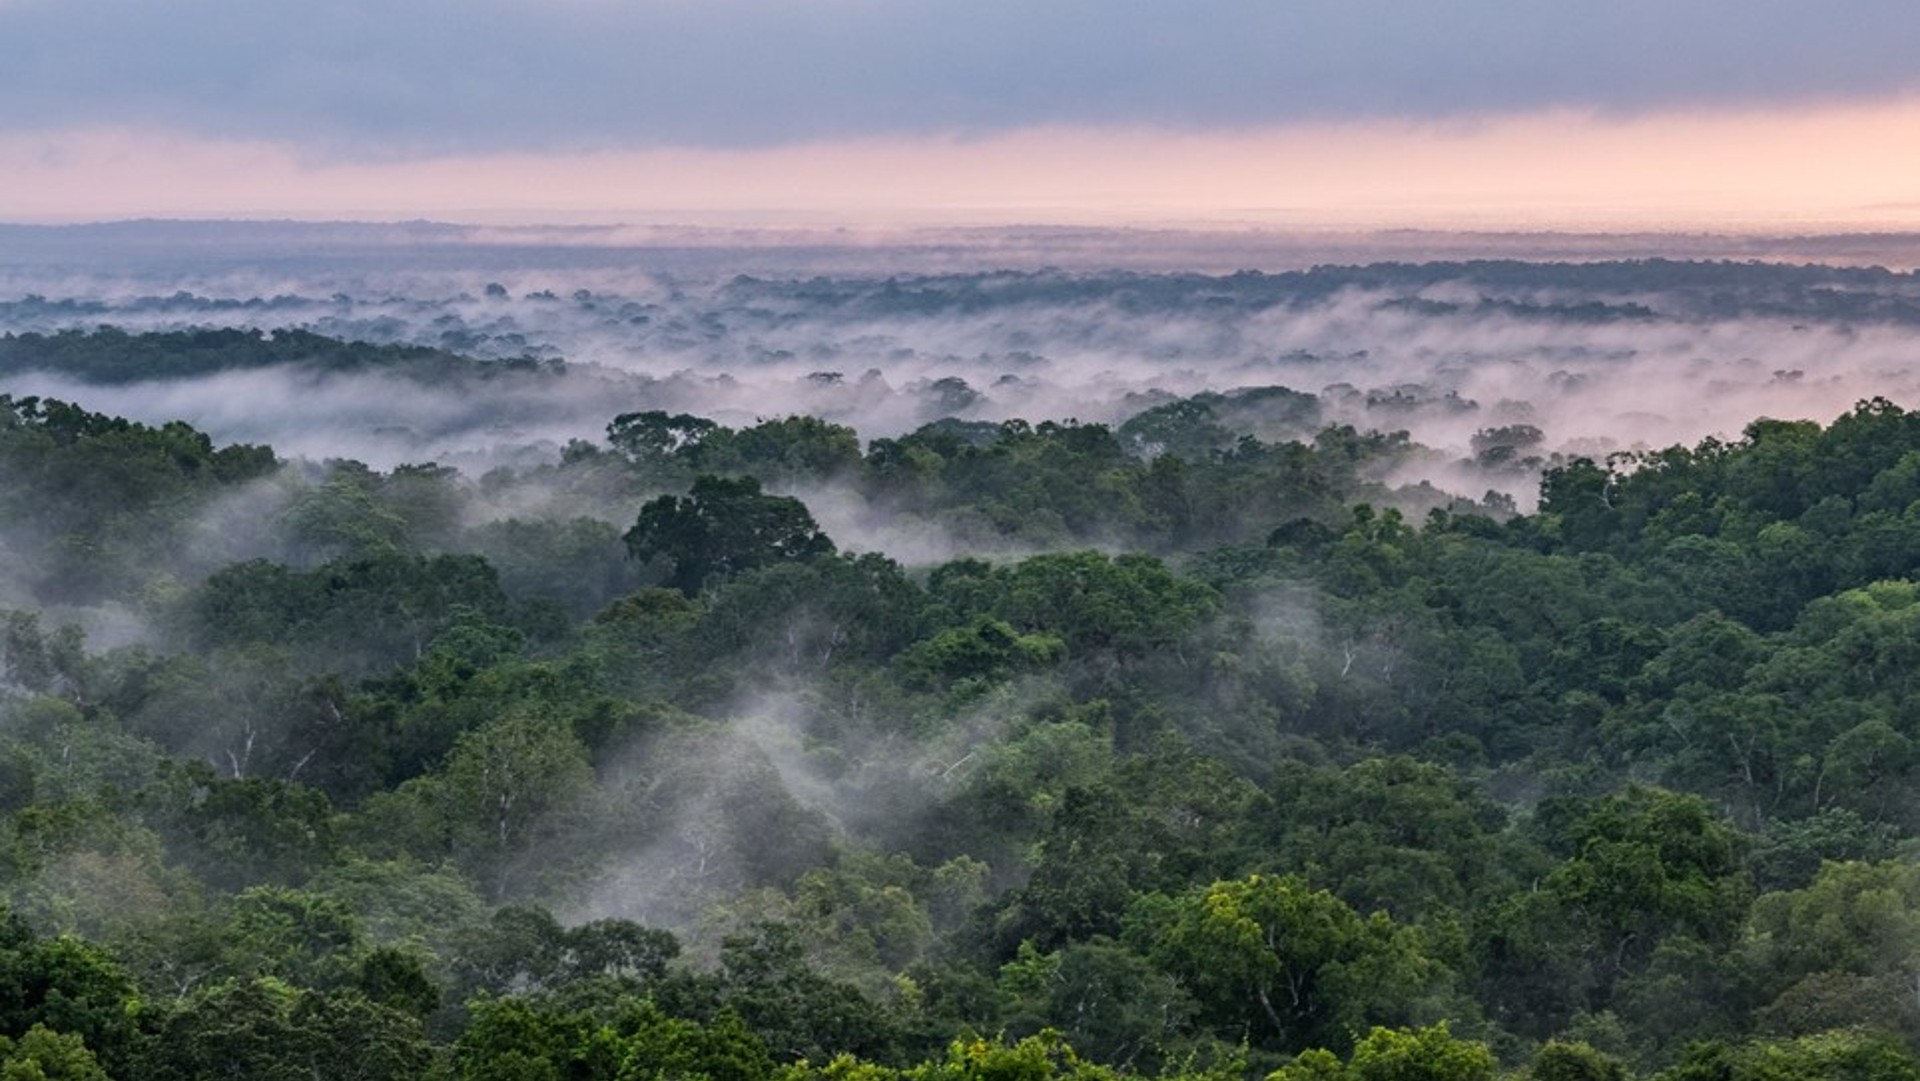 A panoramic view of a rainforest covered with mist